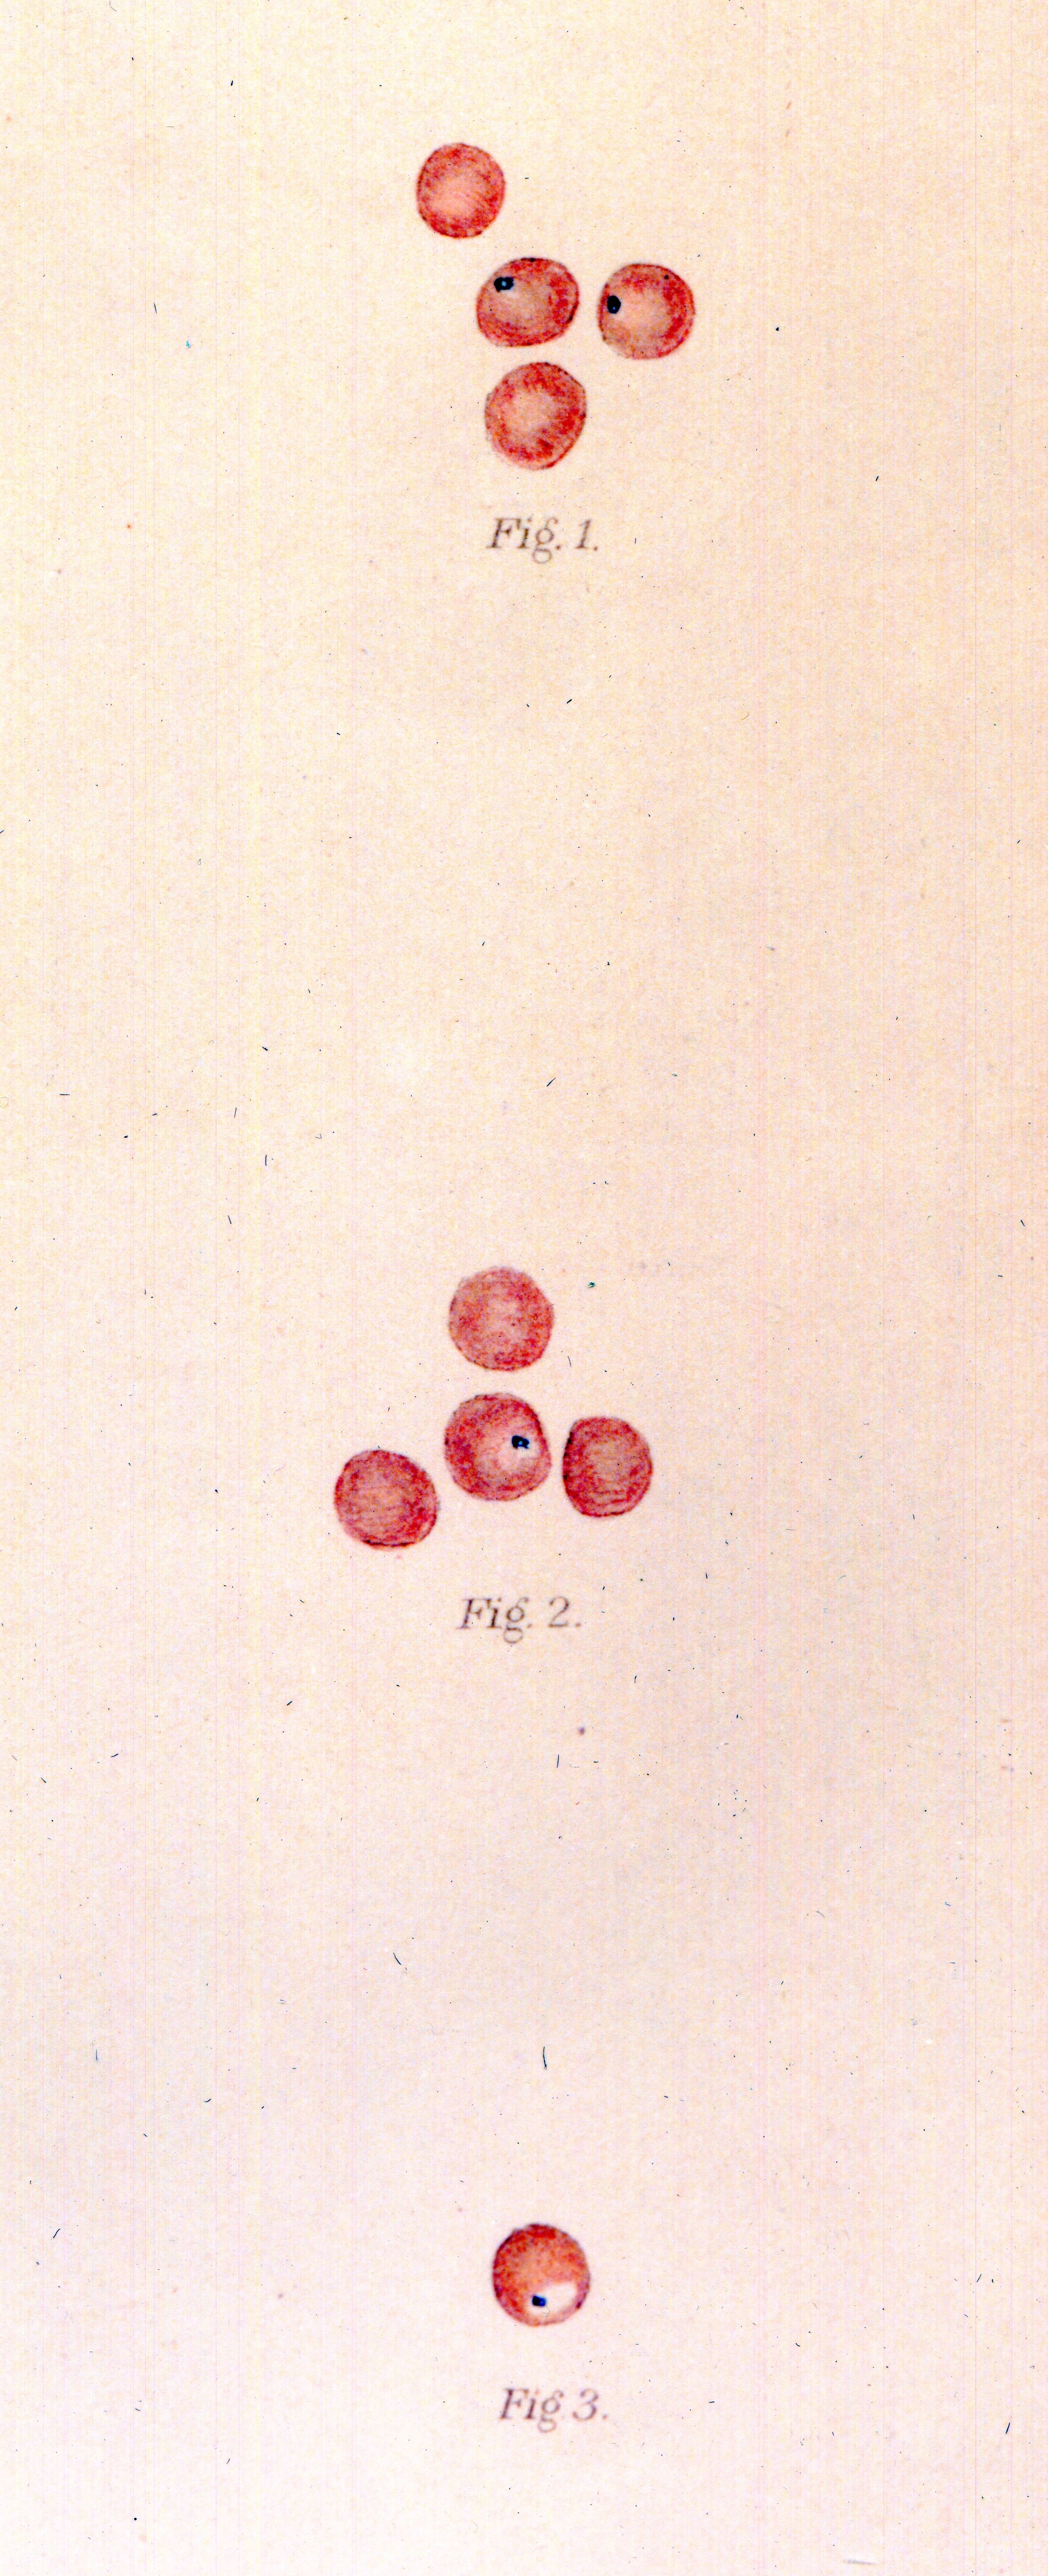 Three sets of drawings of red cells, some with black dots on them.